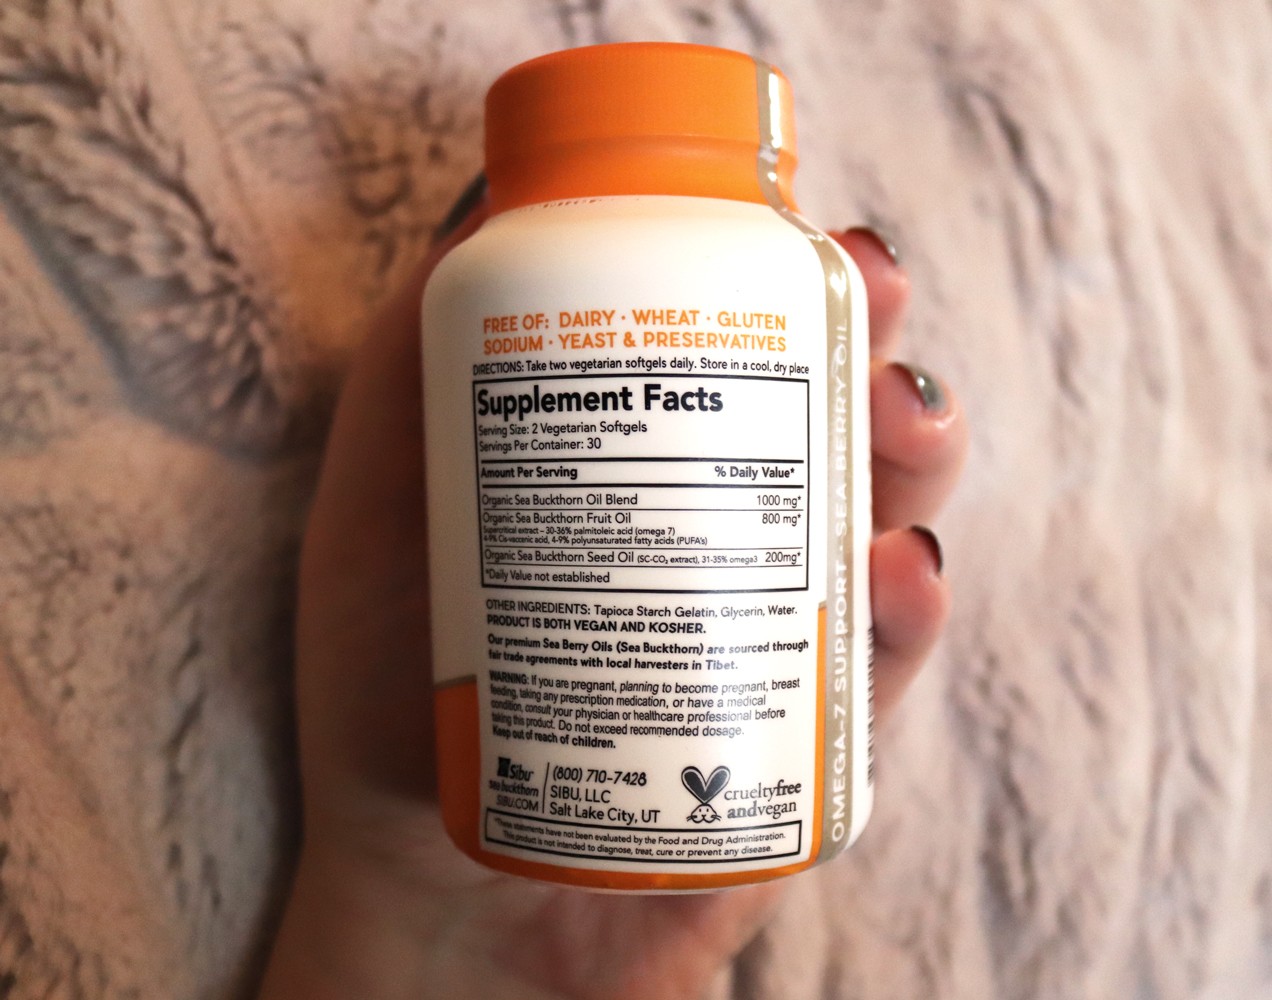 Sibu Beauty Sea Buckthorn Hair Skin and Nails Supplement - Great for Acne Prone Skin - No Carragennan - Supplements and Healthy Foods That Cause Acne by LA beauty blogger My Beauty Bunny